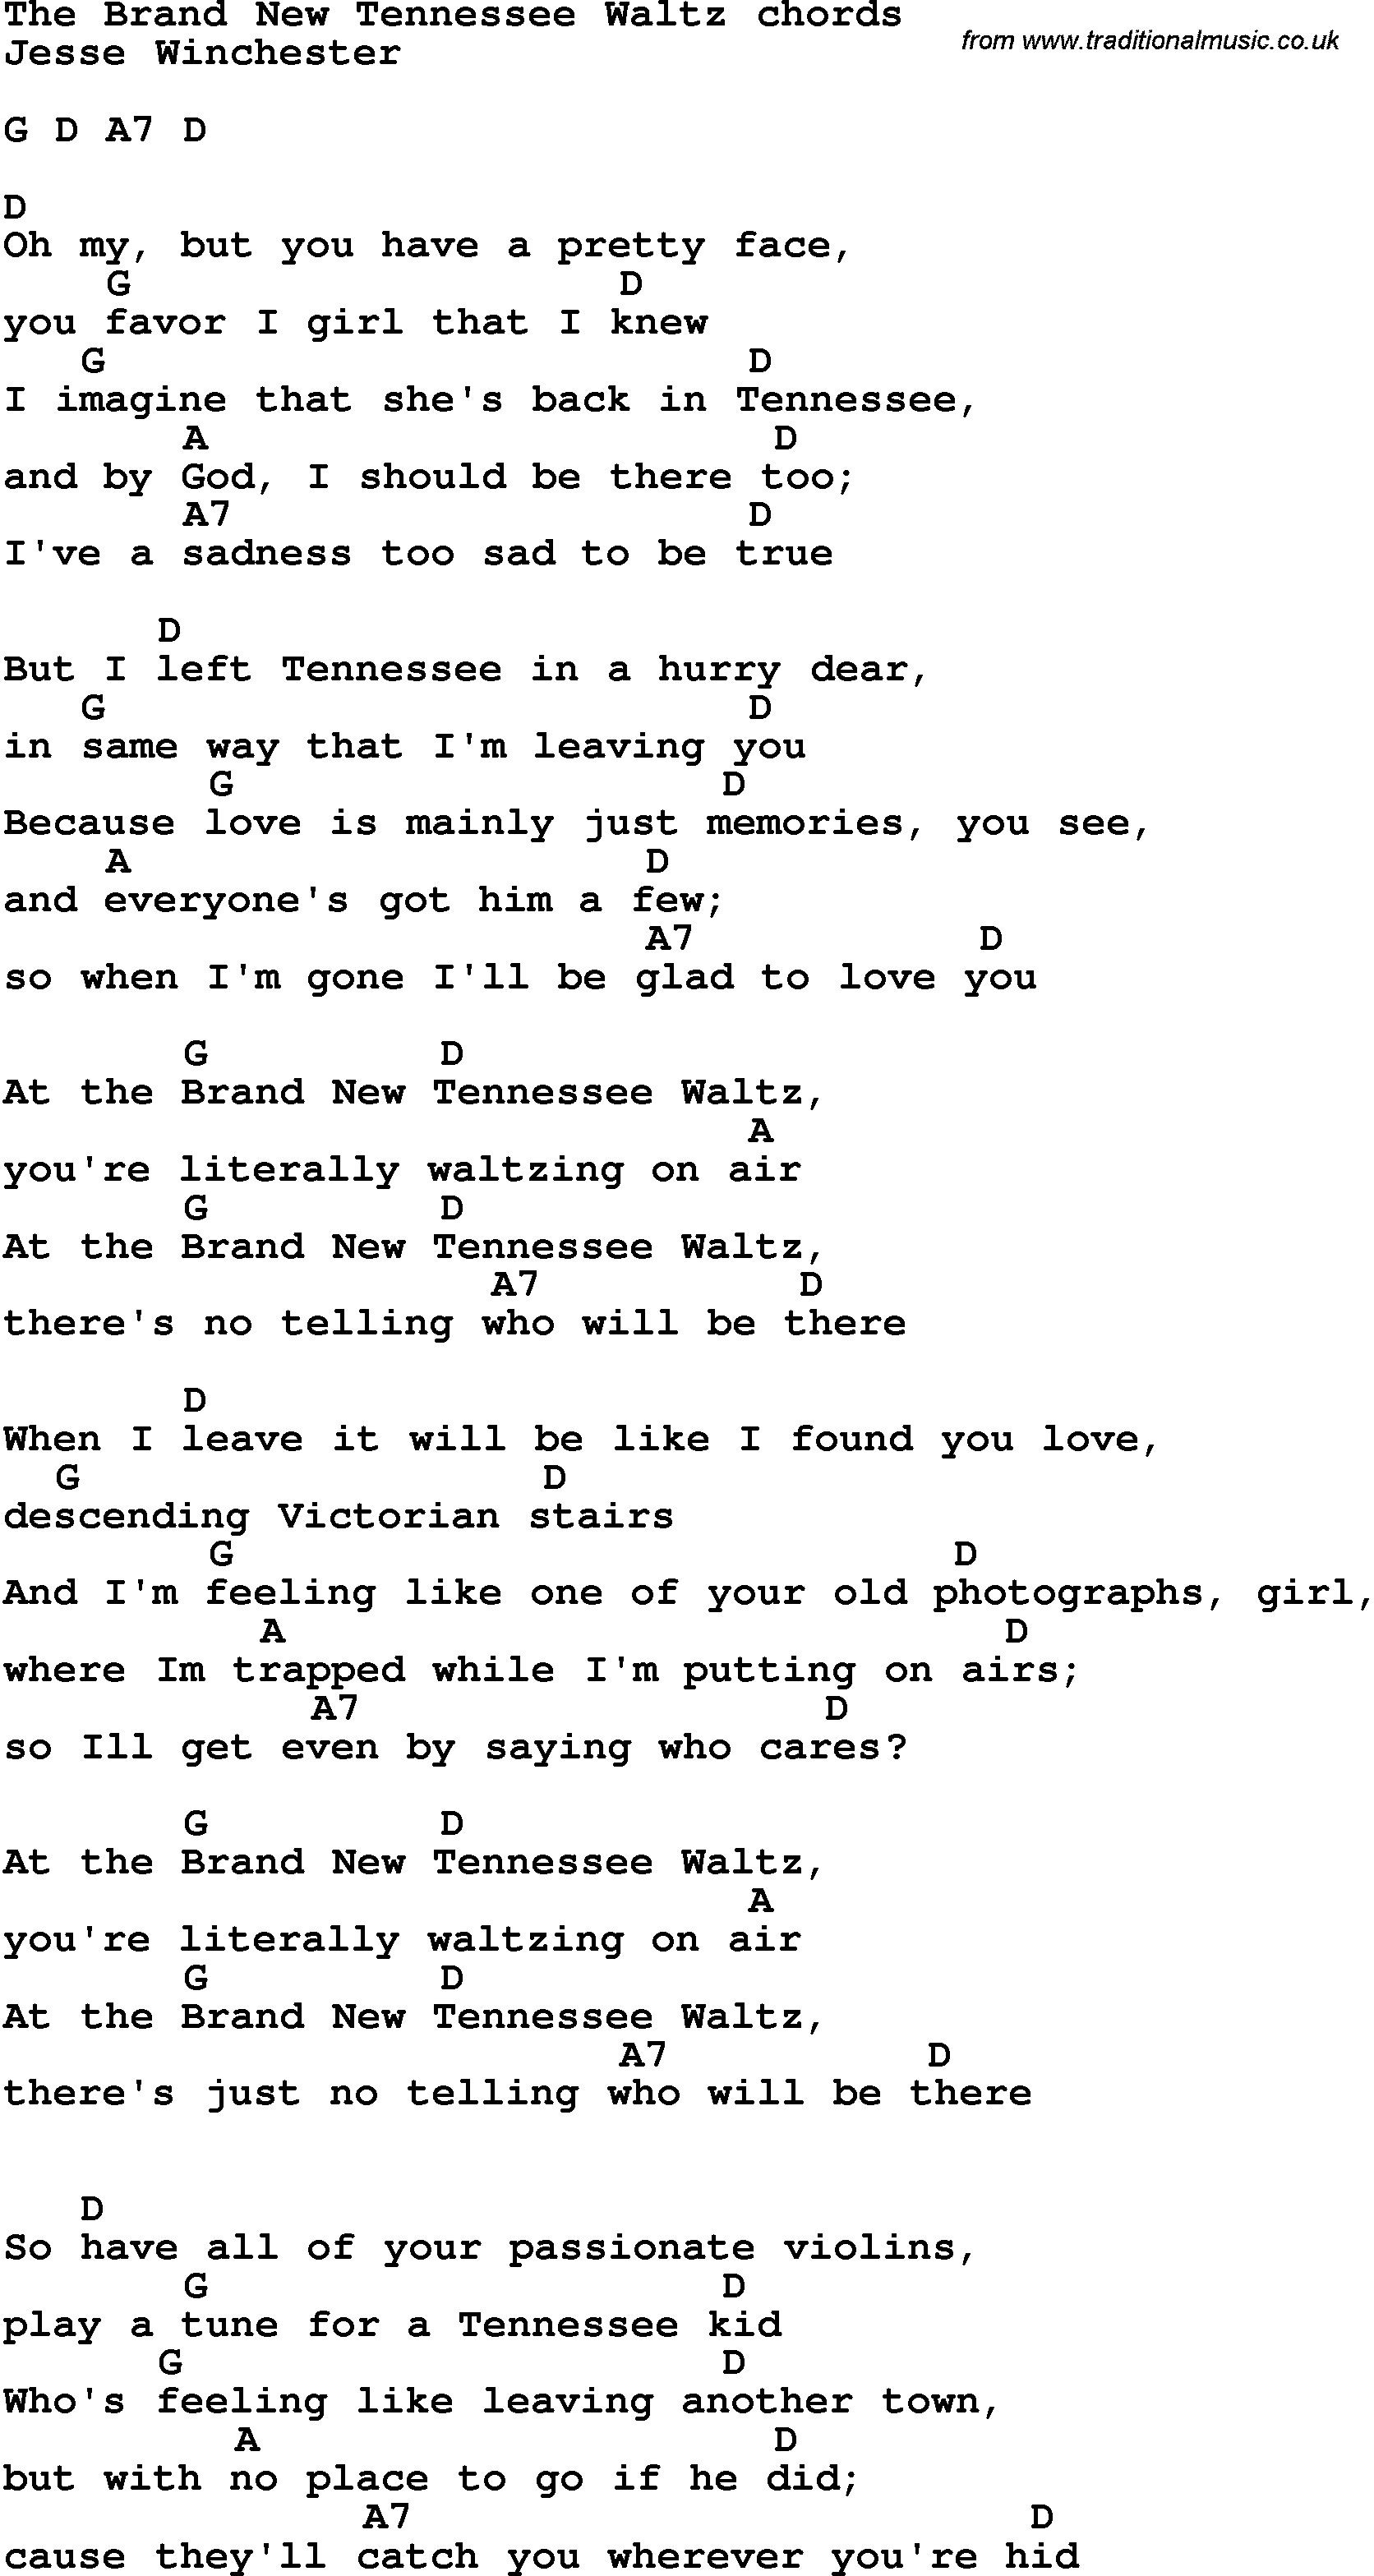 Song Lyrics with guitar chords for The Brand New Tennessee Waltz